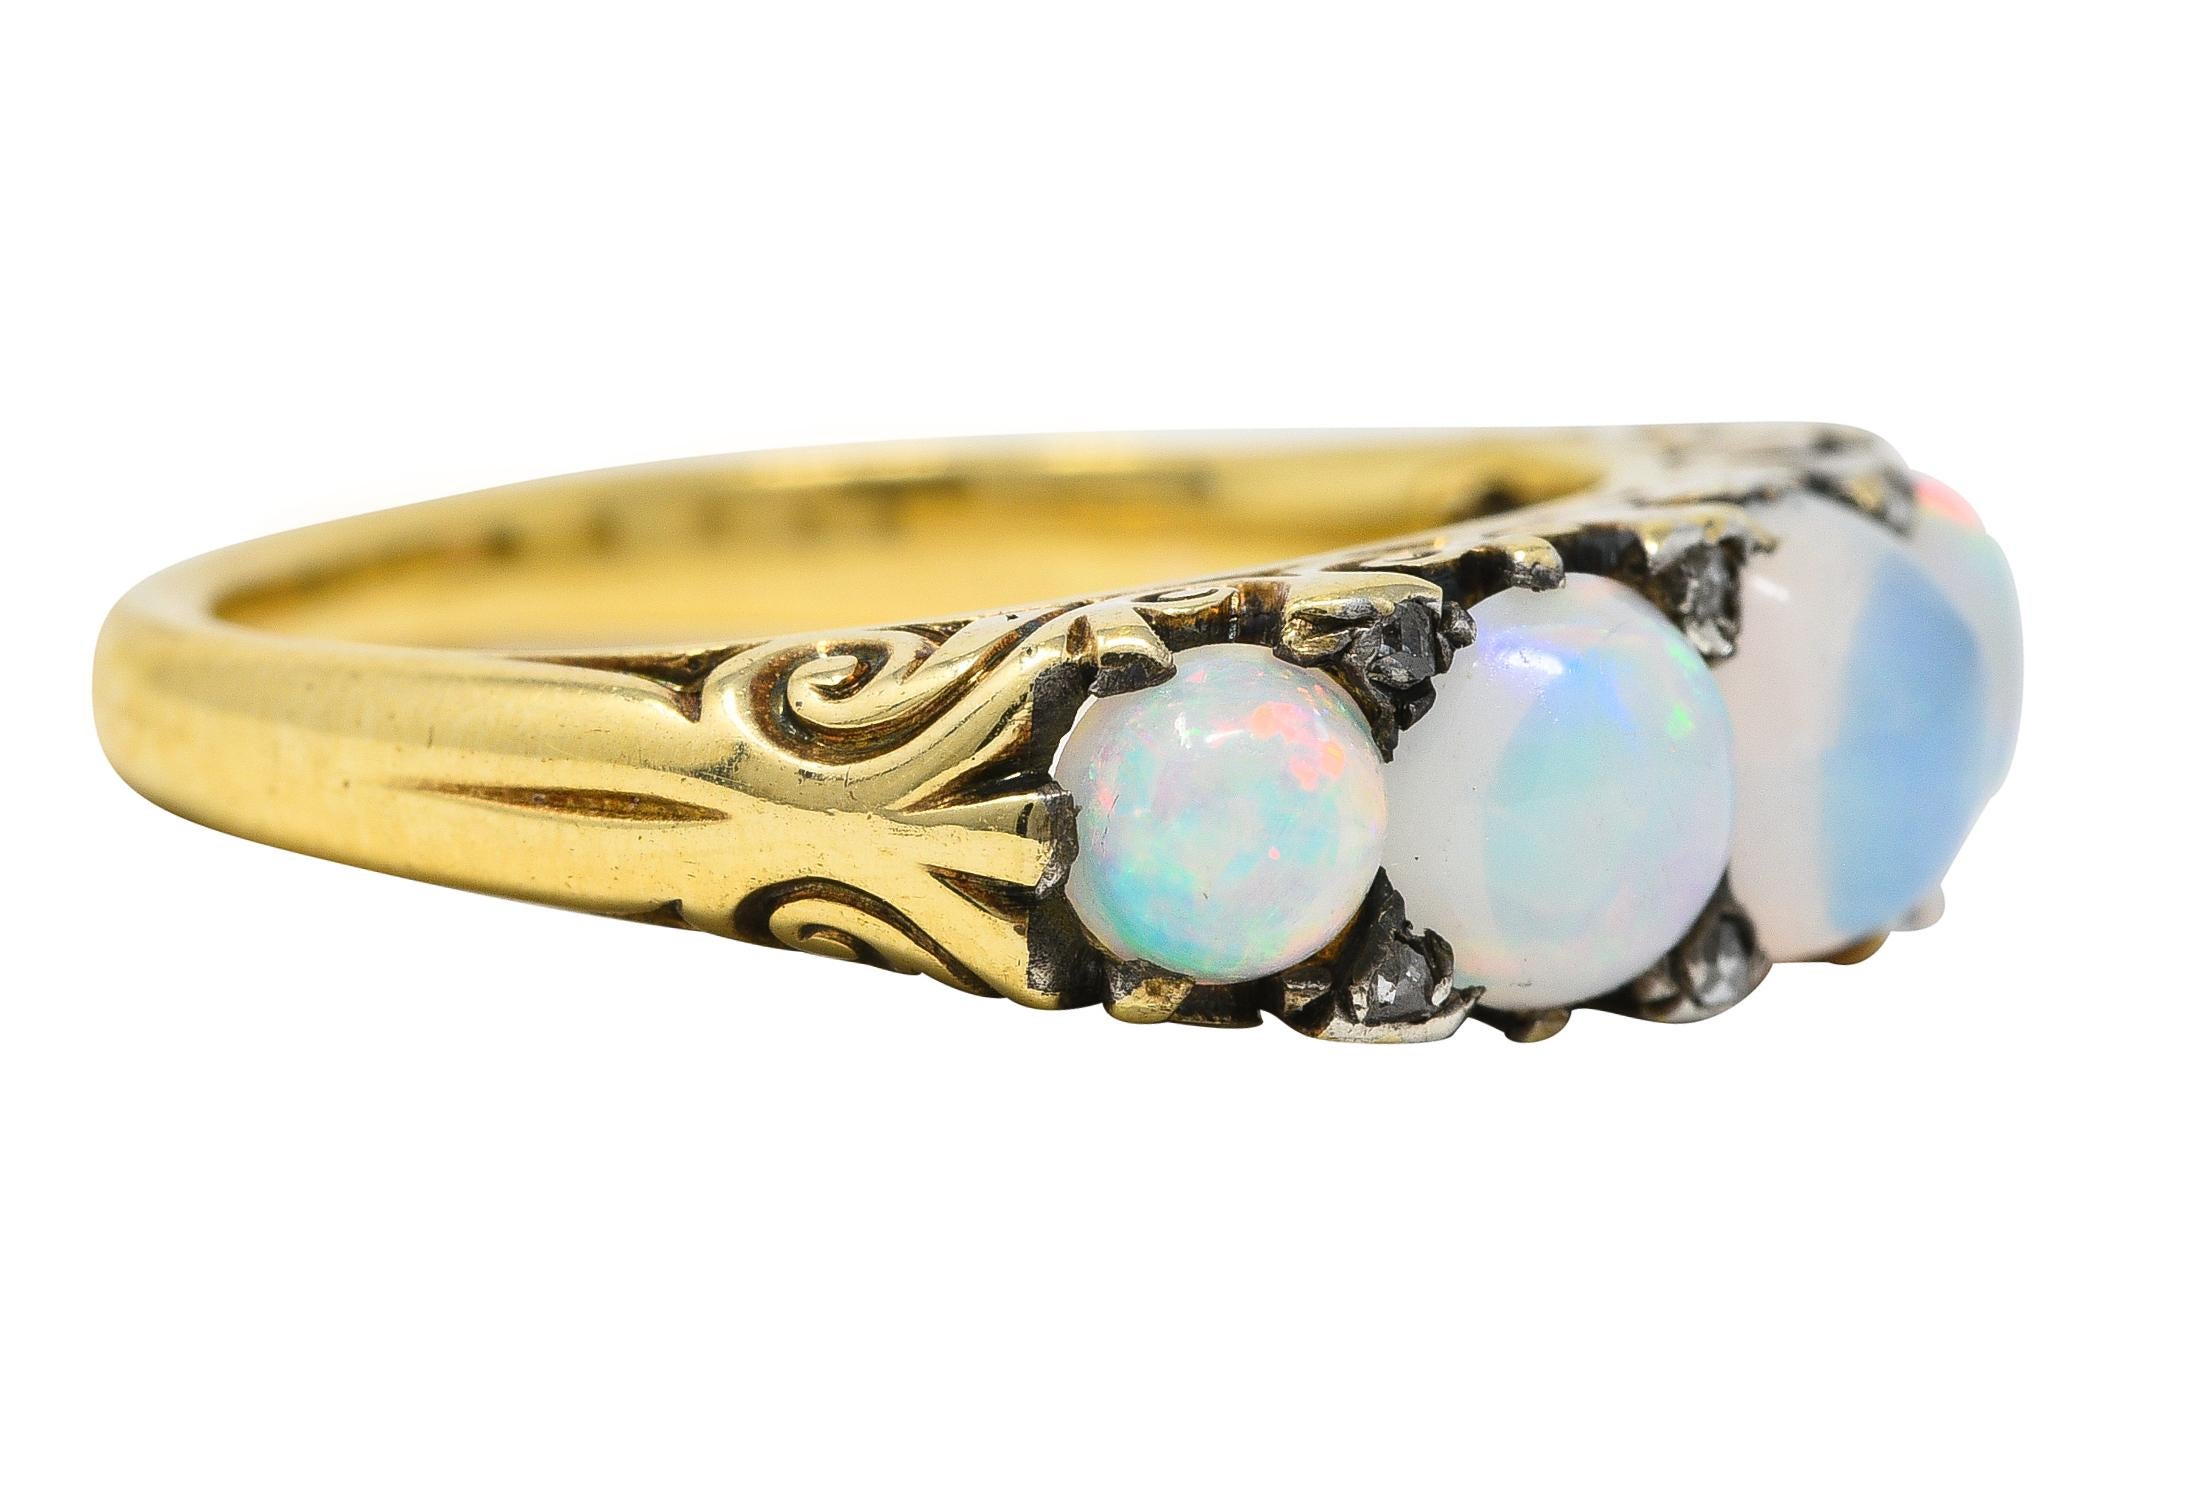 Five stone ring centers a prong set 5.0 mm cushion shaped opal cabochon. Flanked by prong set round graduated opals on either side - ranging from 4.8 to 3.5 mm. Well matched white in body color with very strong spectral play-of-color. Accented by